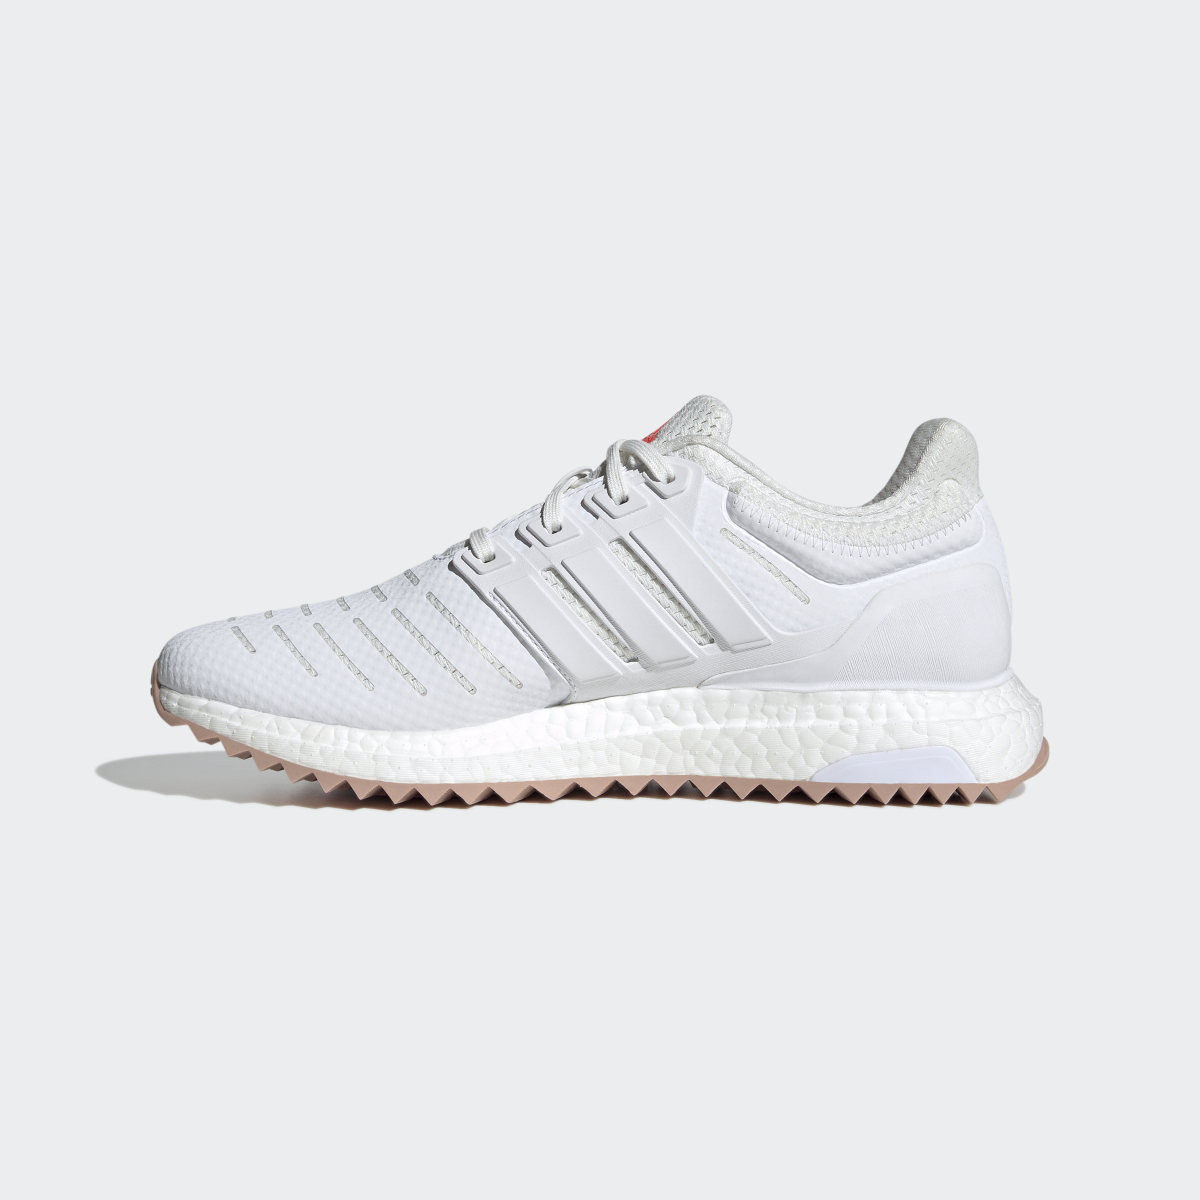 Adidas Ultraboost DNA XXII Lifestyle Running Sportswear Capsule Collection Shoes. 7